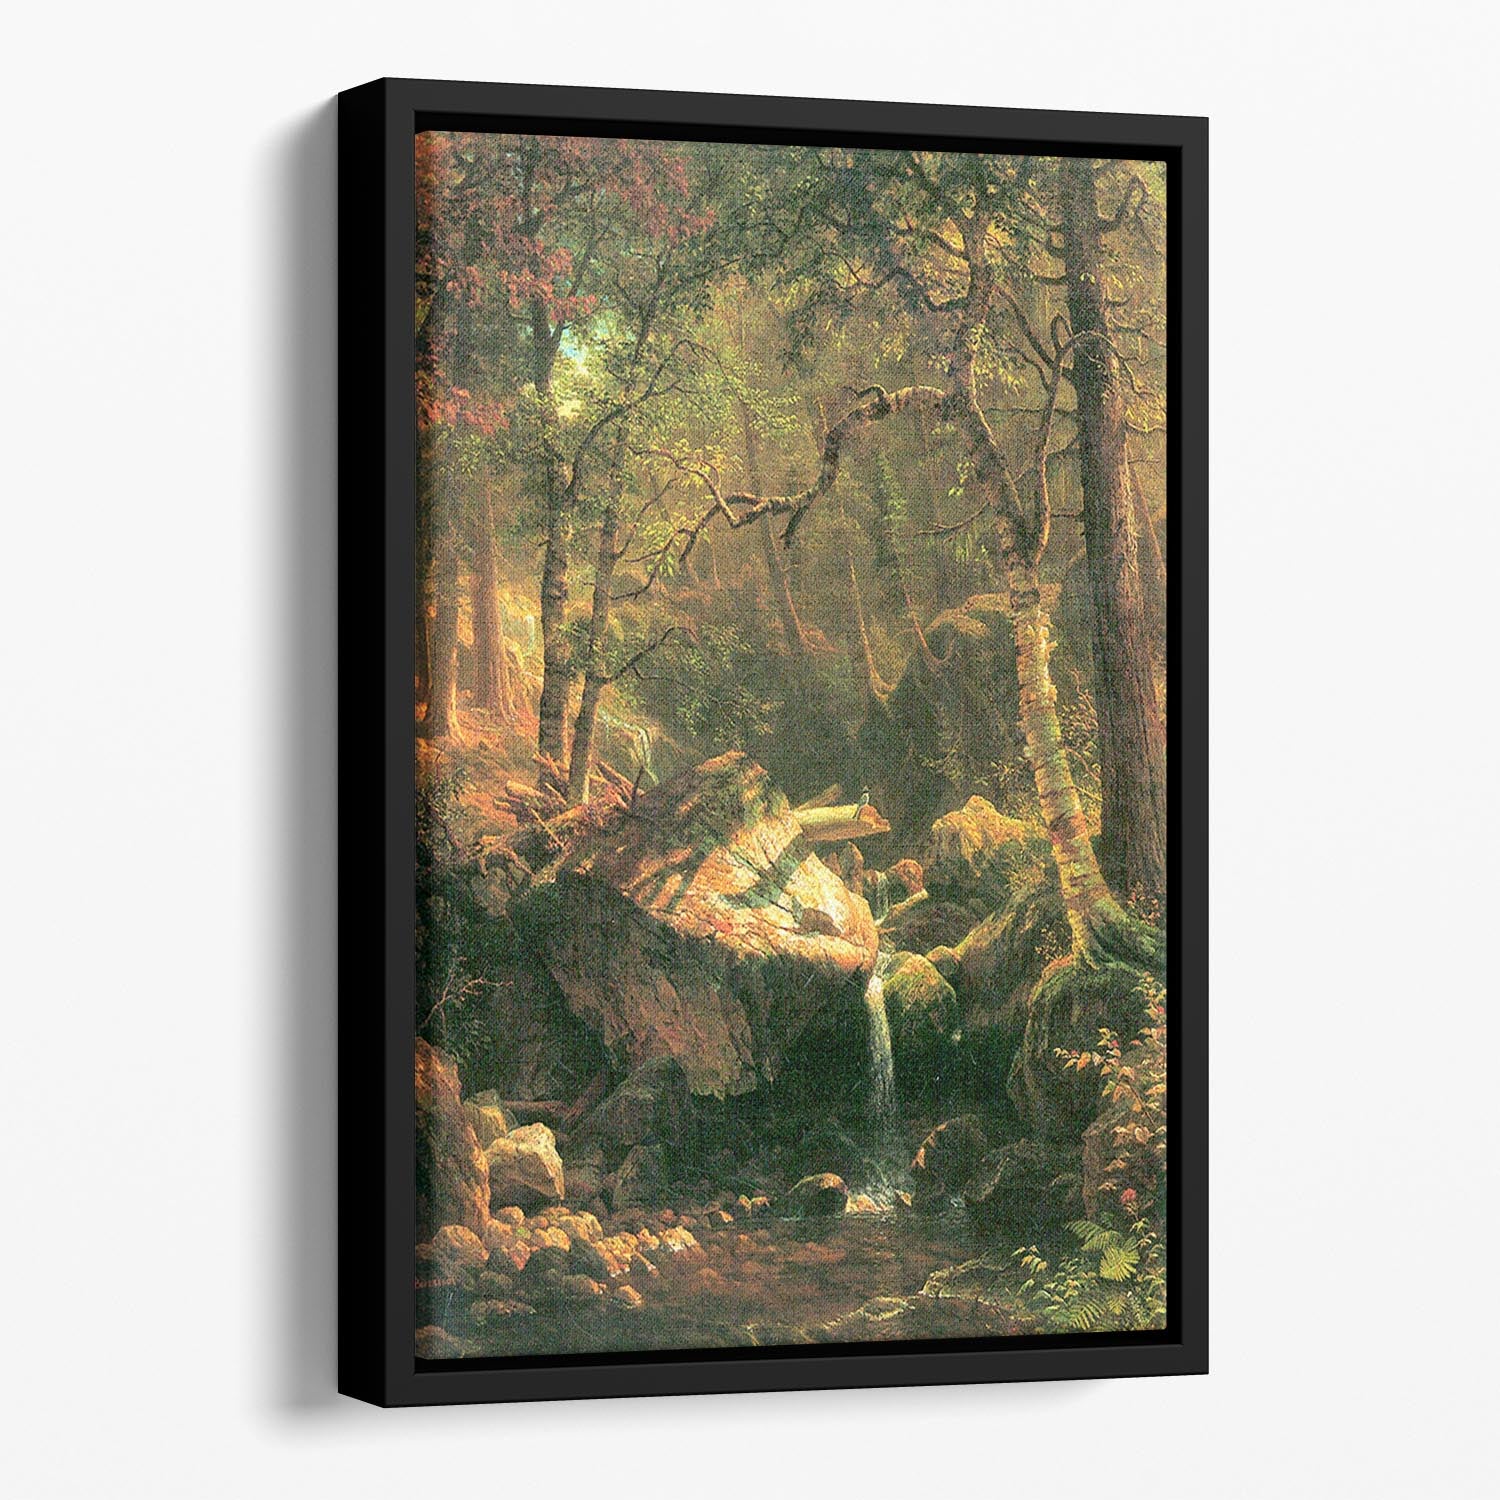 The Mountain by Bierstadt Floating Framed Canvas - Canvas Art Rocks - 1